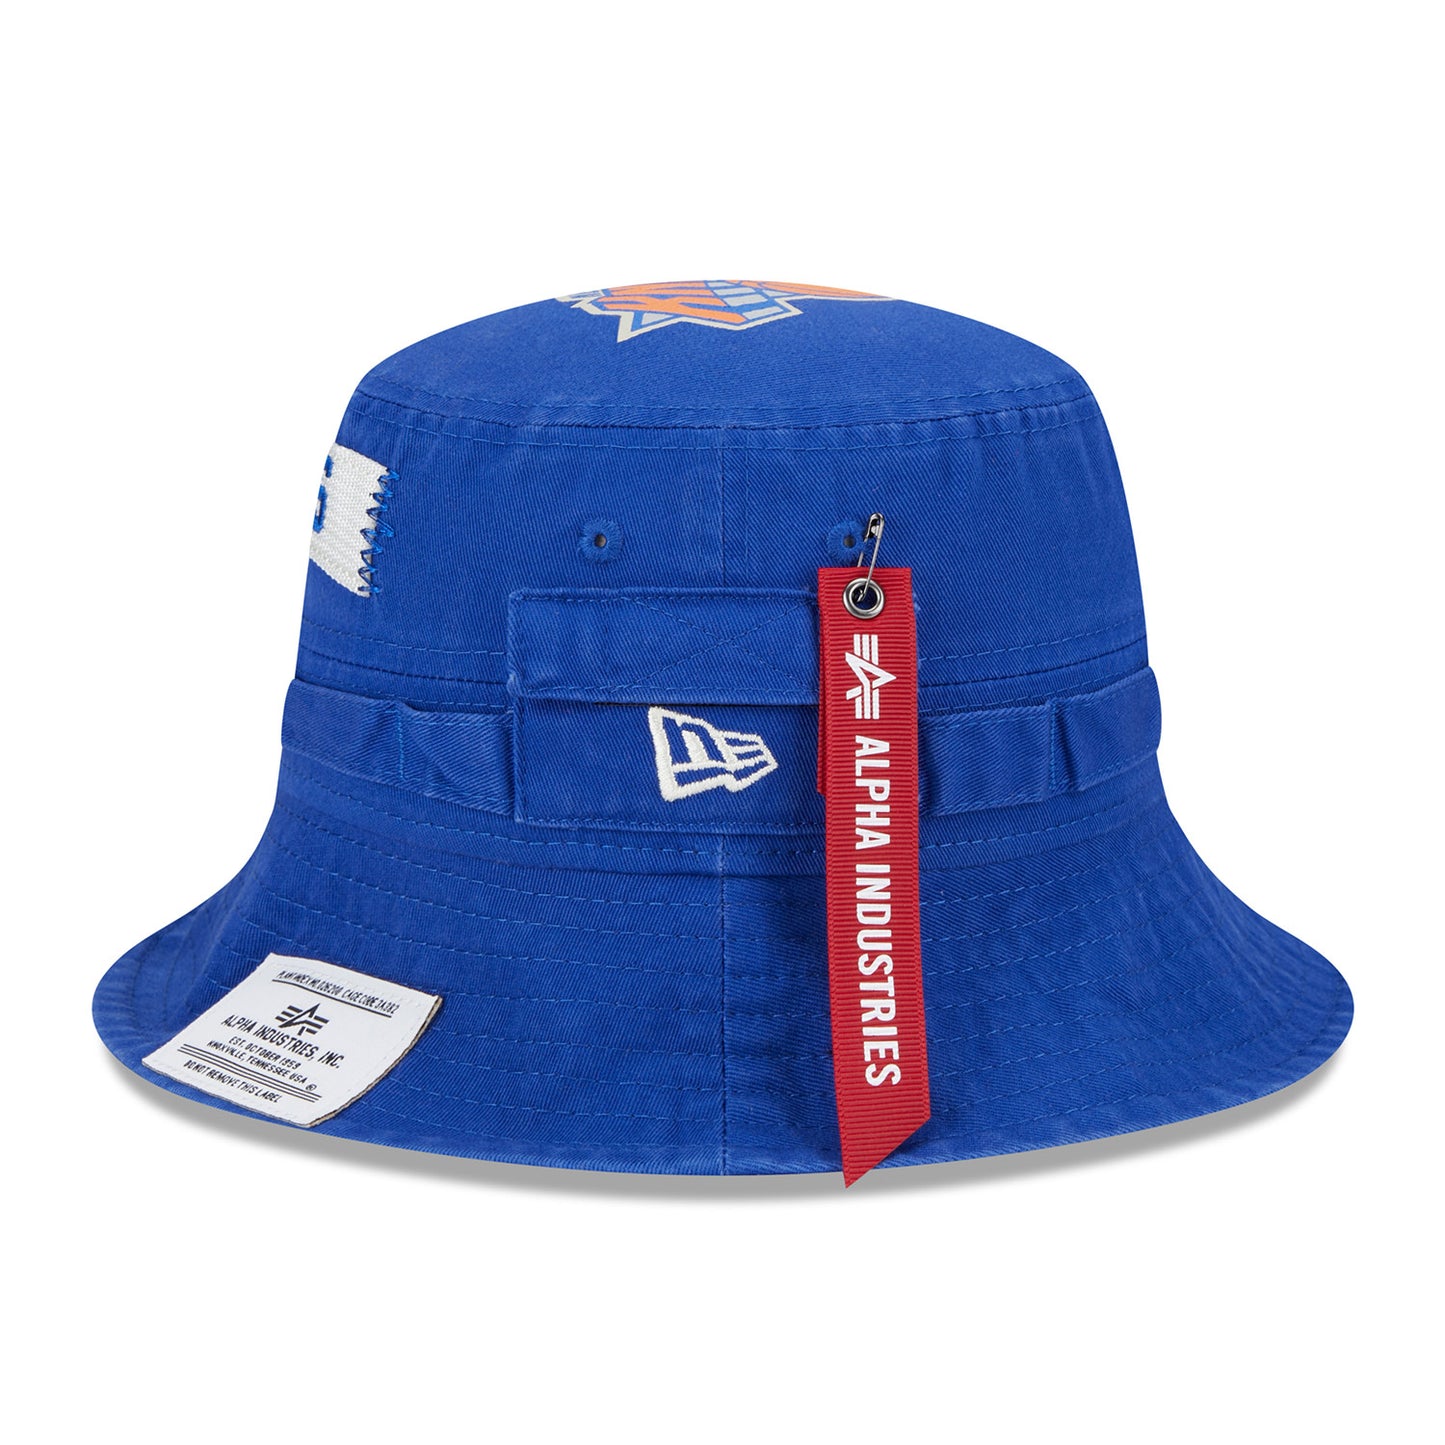 New Era Knicks Alpha Collection Bucket Hat In Blue - Left Side View